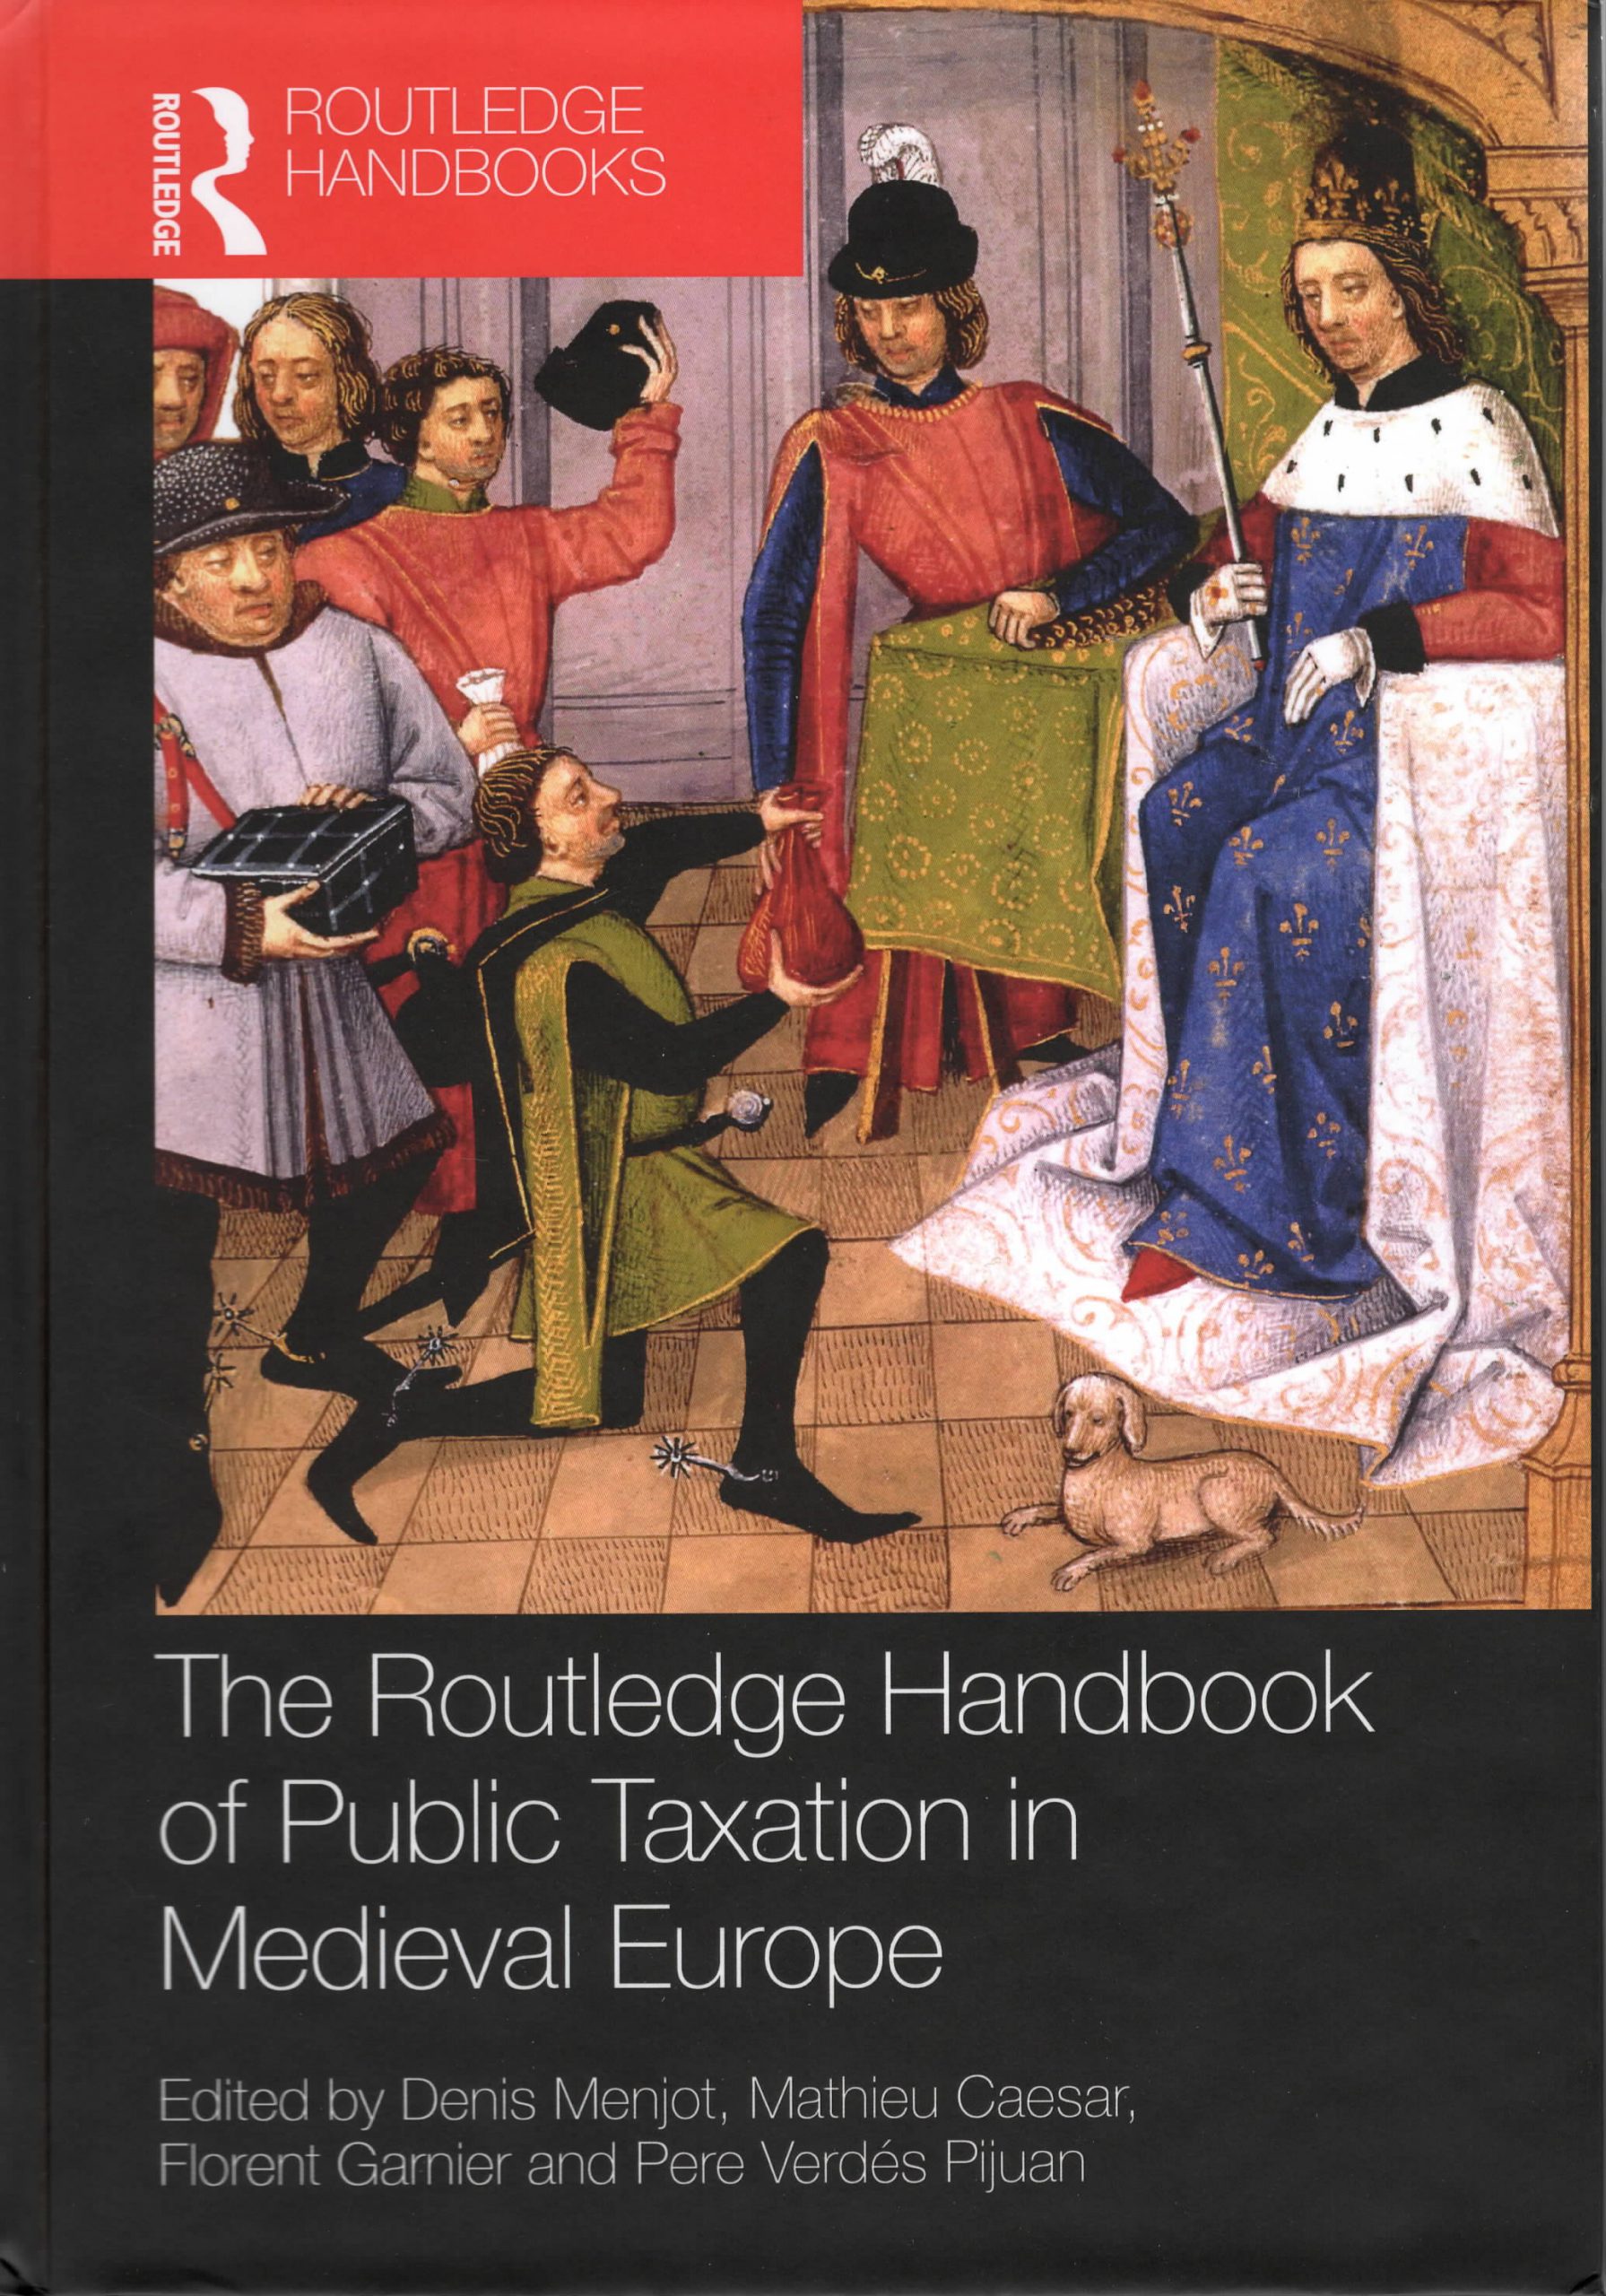 The Routledge Handbook of Public Taxation in Medieval Europe